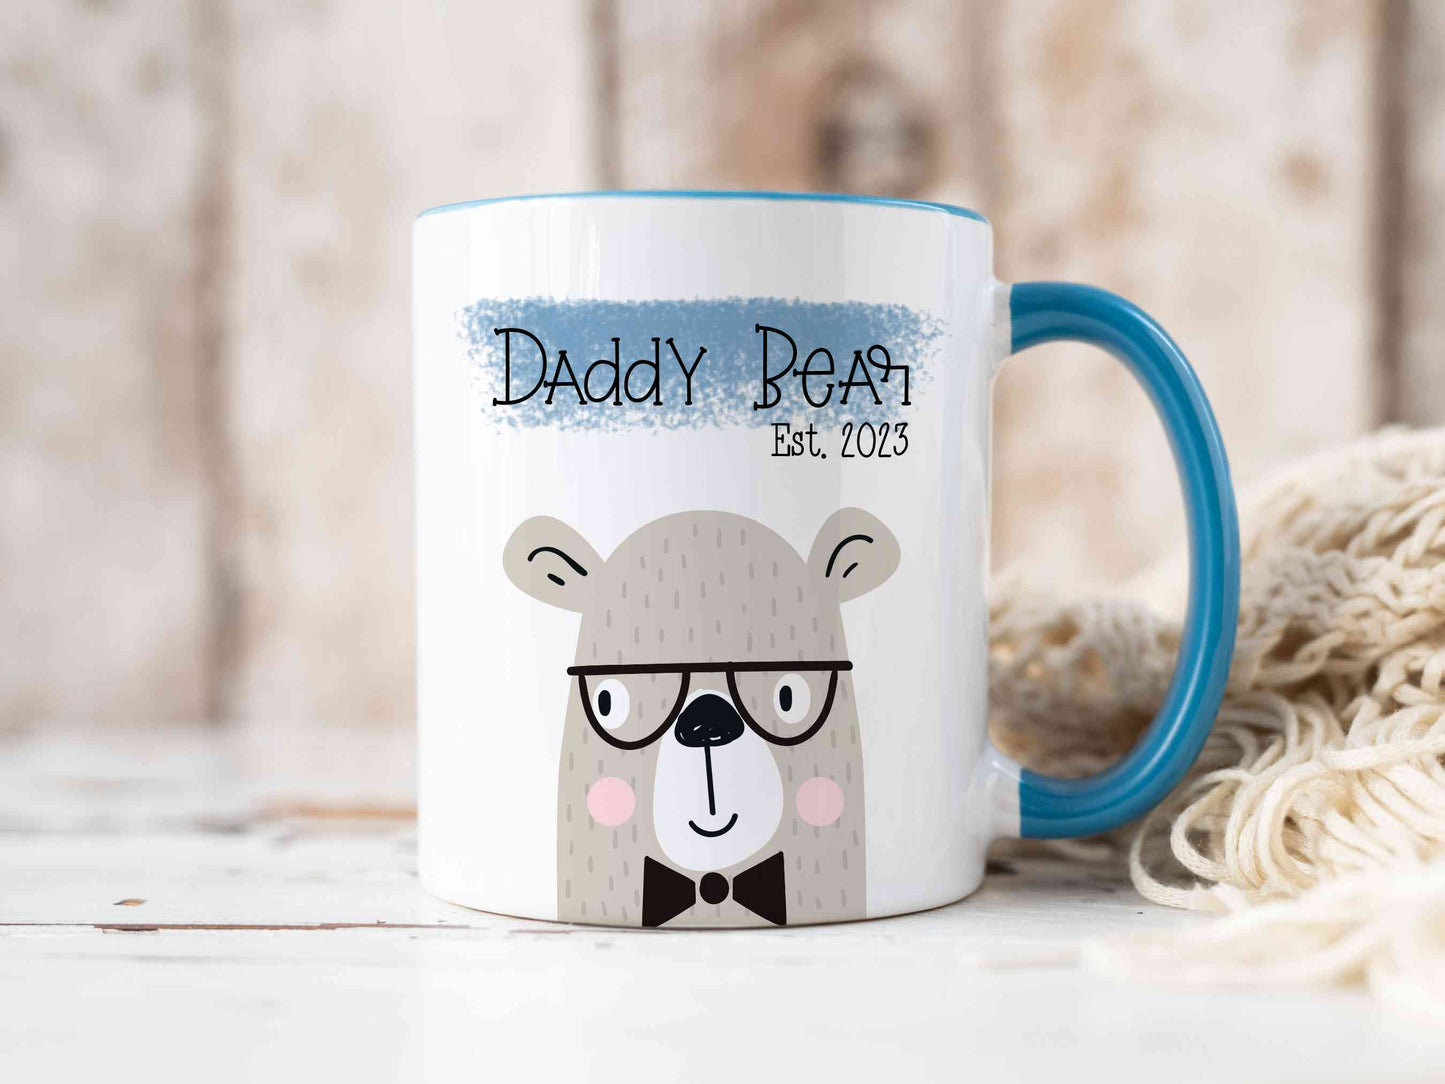 white mug with a blue handle sitting on a worktop. There is a cute bear design printed on the mug with the text daddy bear above over a blue banner.